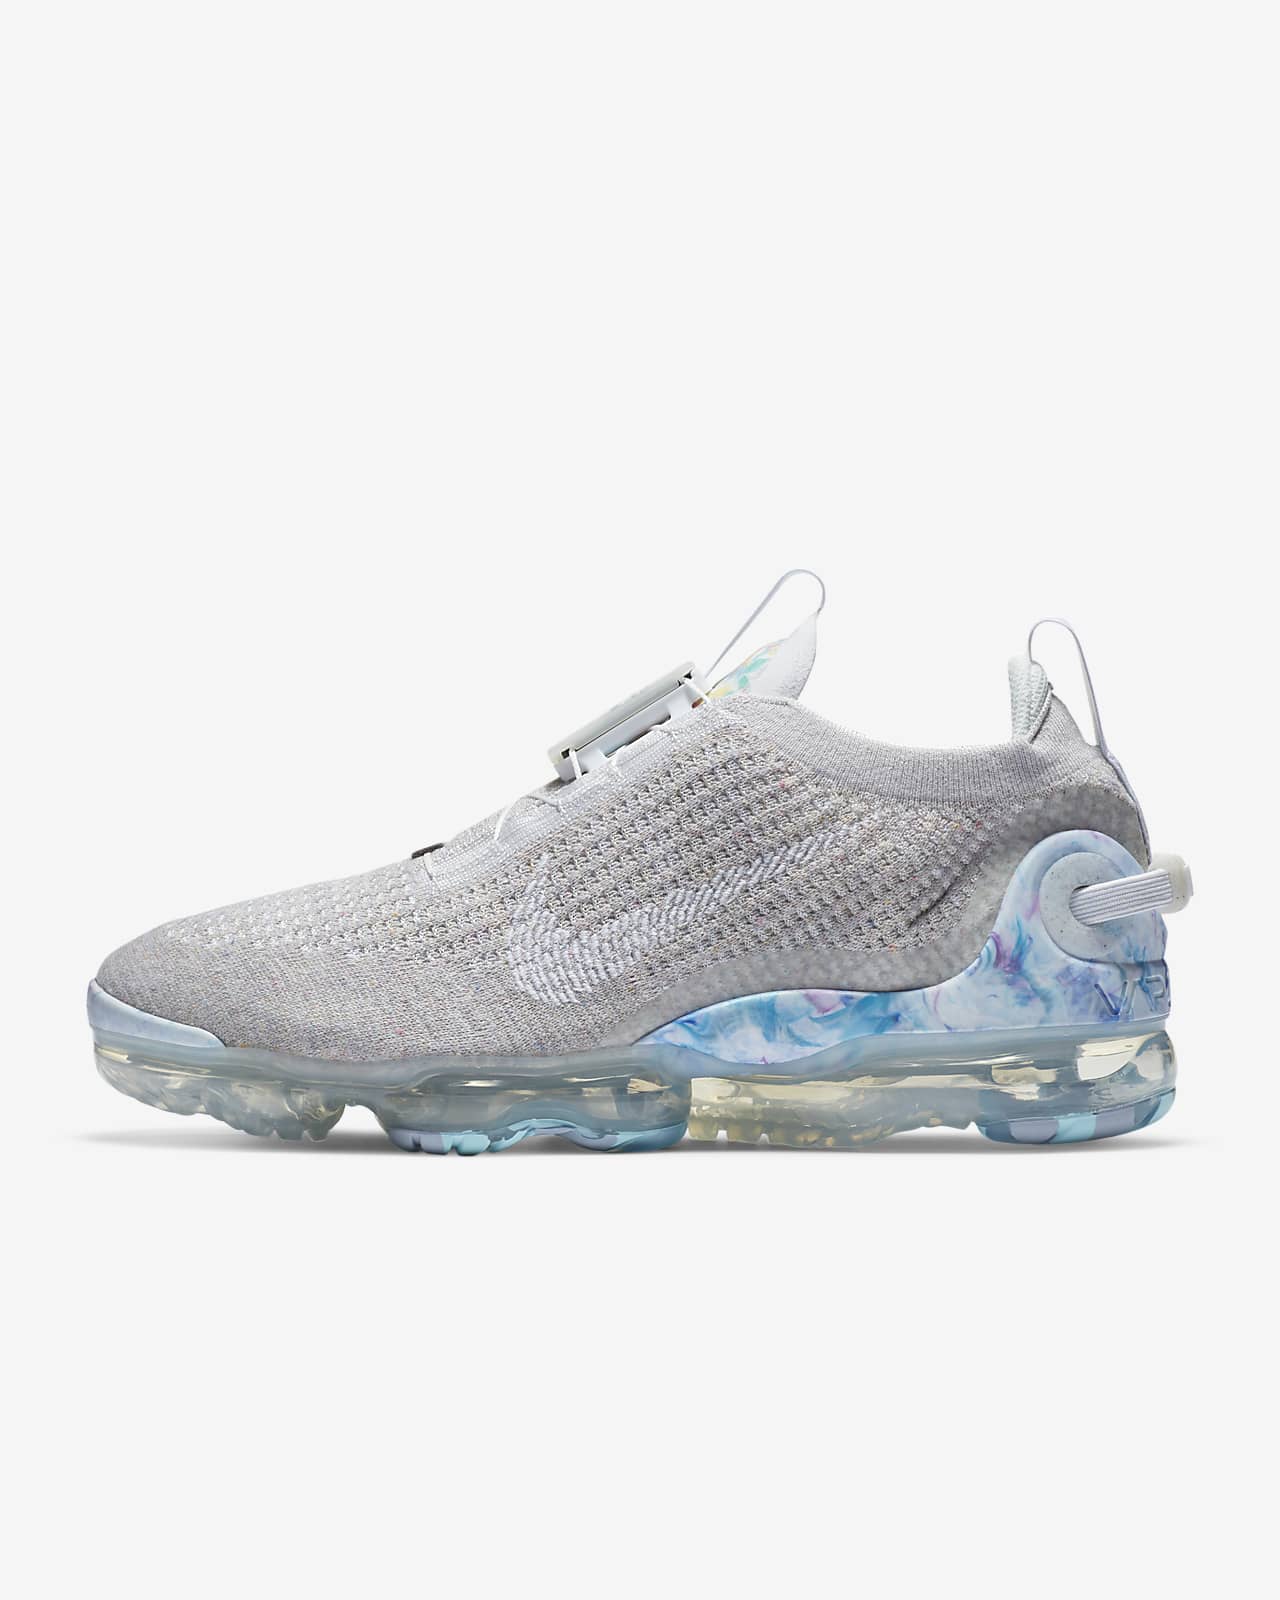 Nike Air Vapormax Products trends 2020 Online Shop at